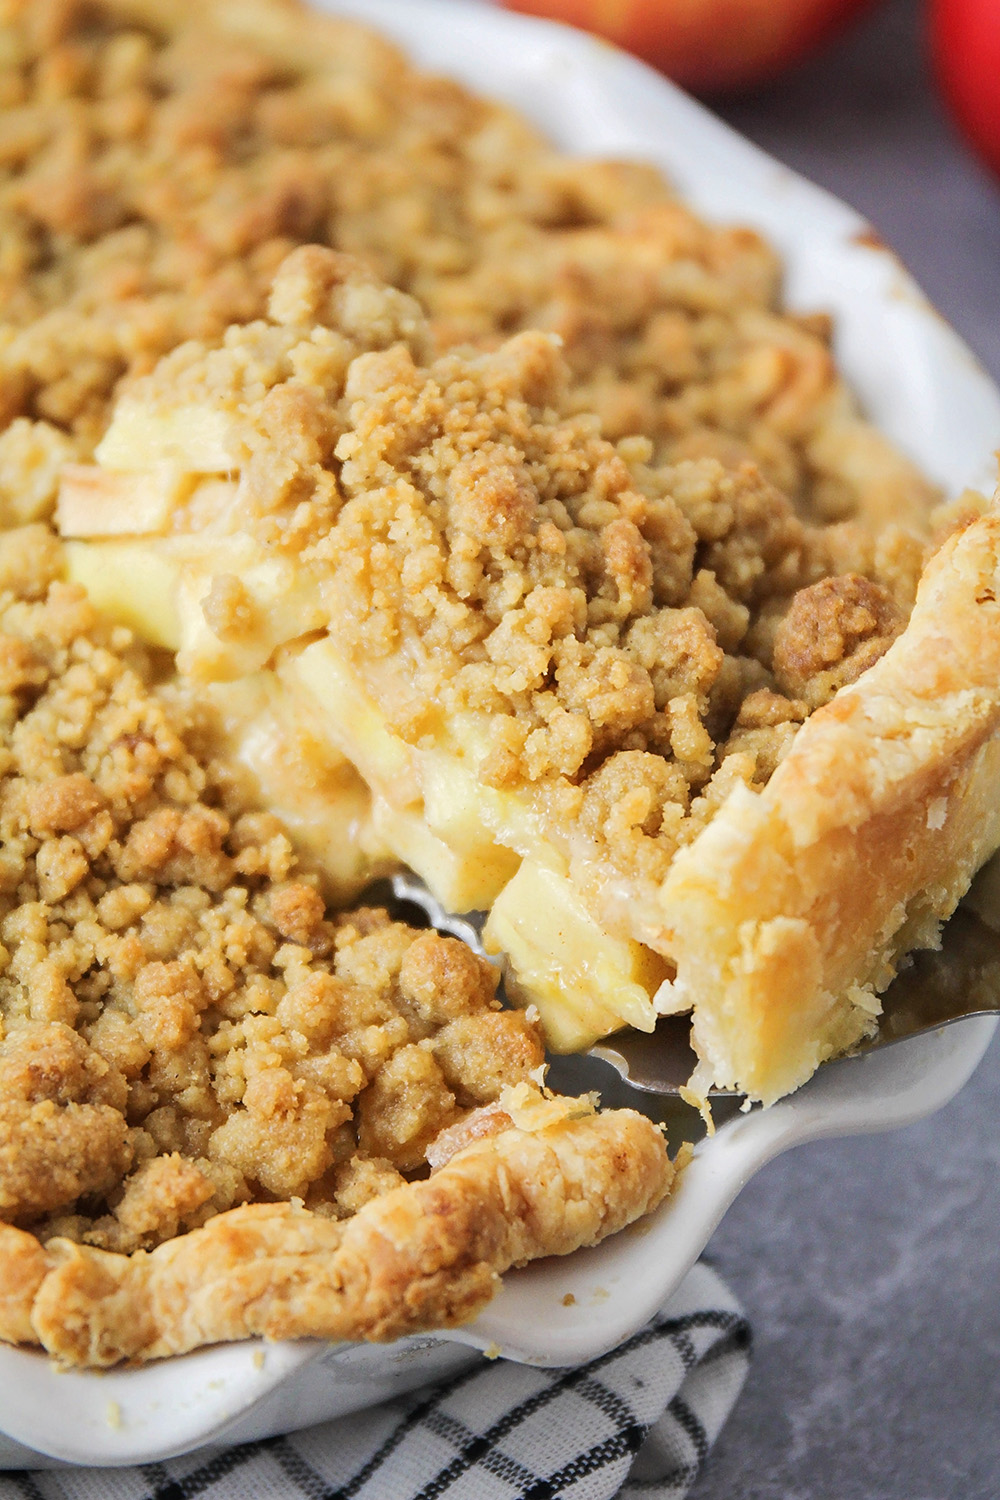 This delicious dutch apple pie is loaded with juicy sweet apples, and topped with an irresistible buttery streusel!